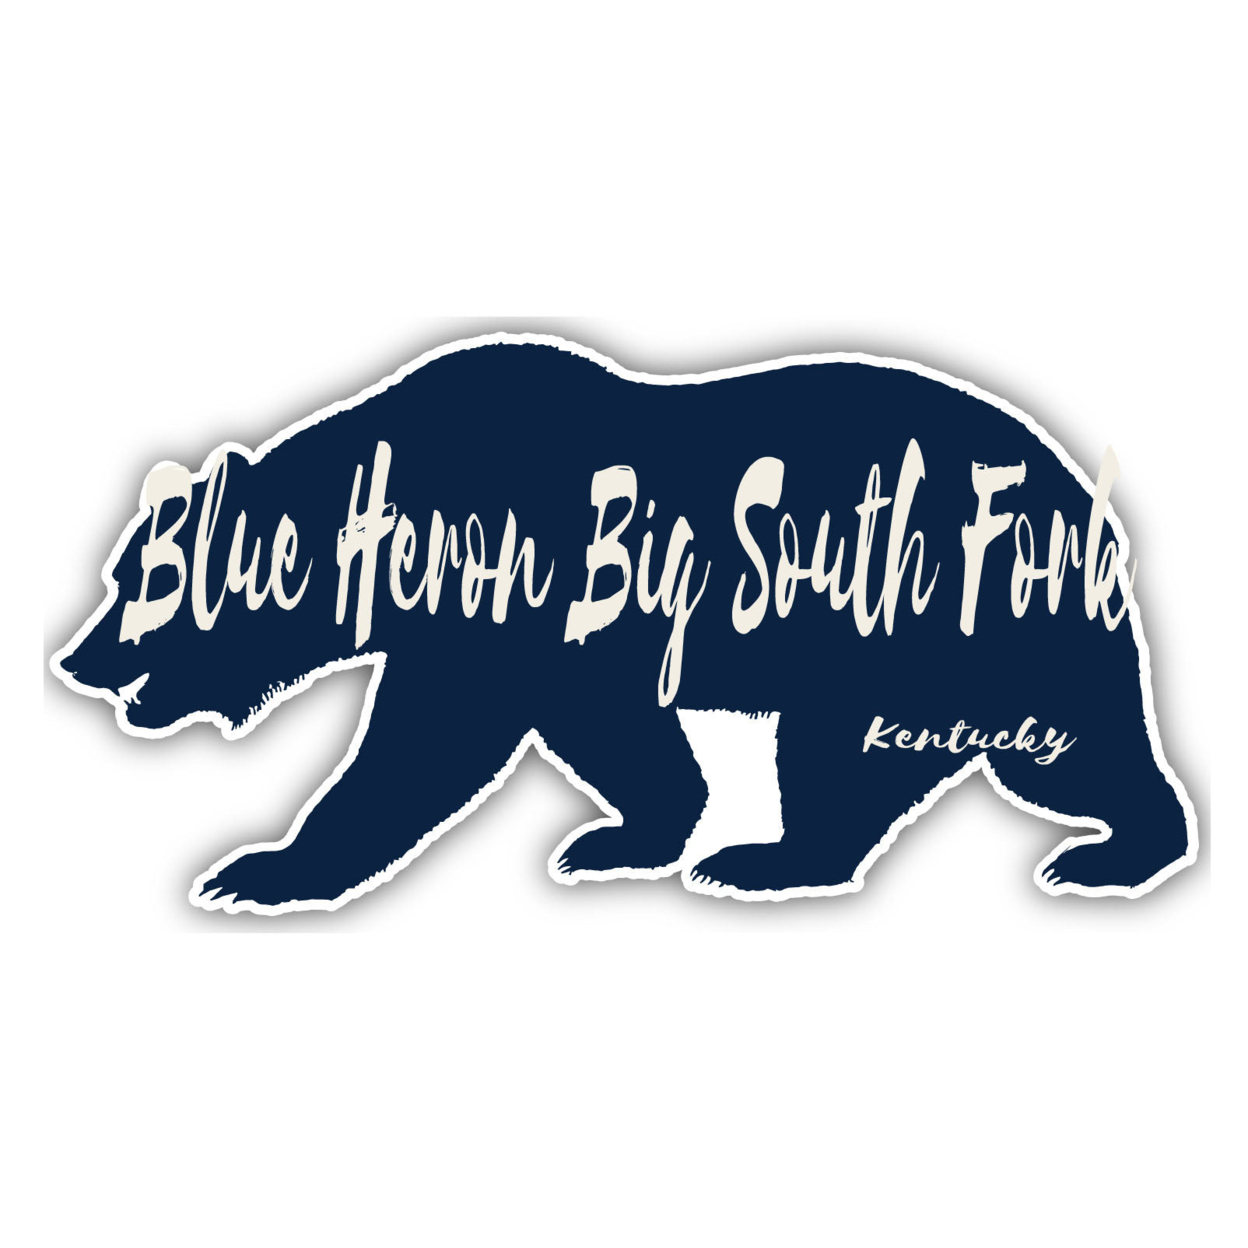 Blue Heron Big South Fork Kentucky Souvenir Decorative Stickers (Choose Theme And Size) - 4-Pack, 4-Inch, Bear